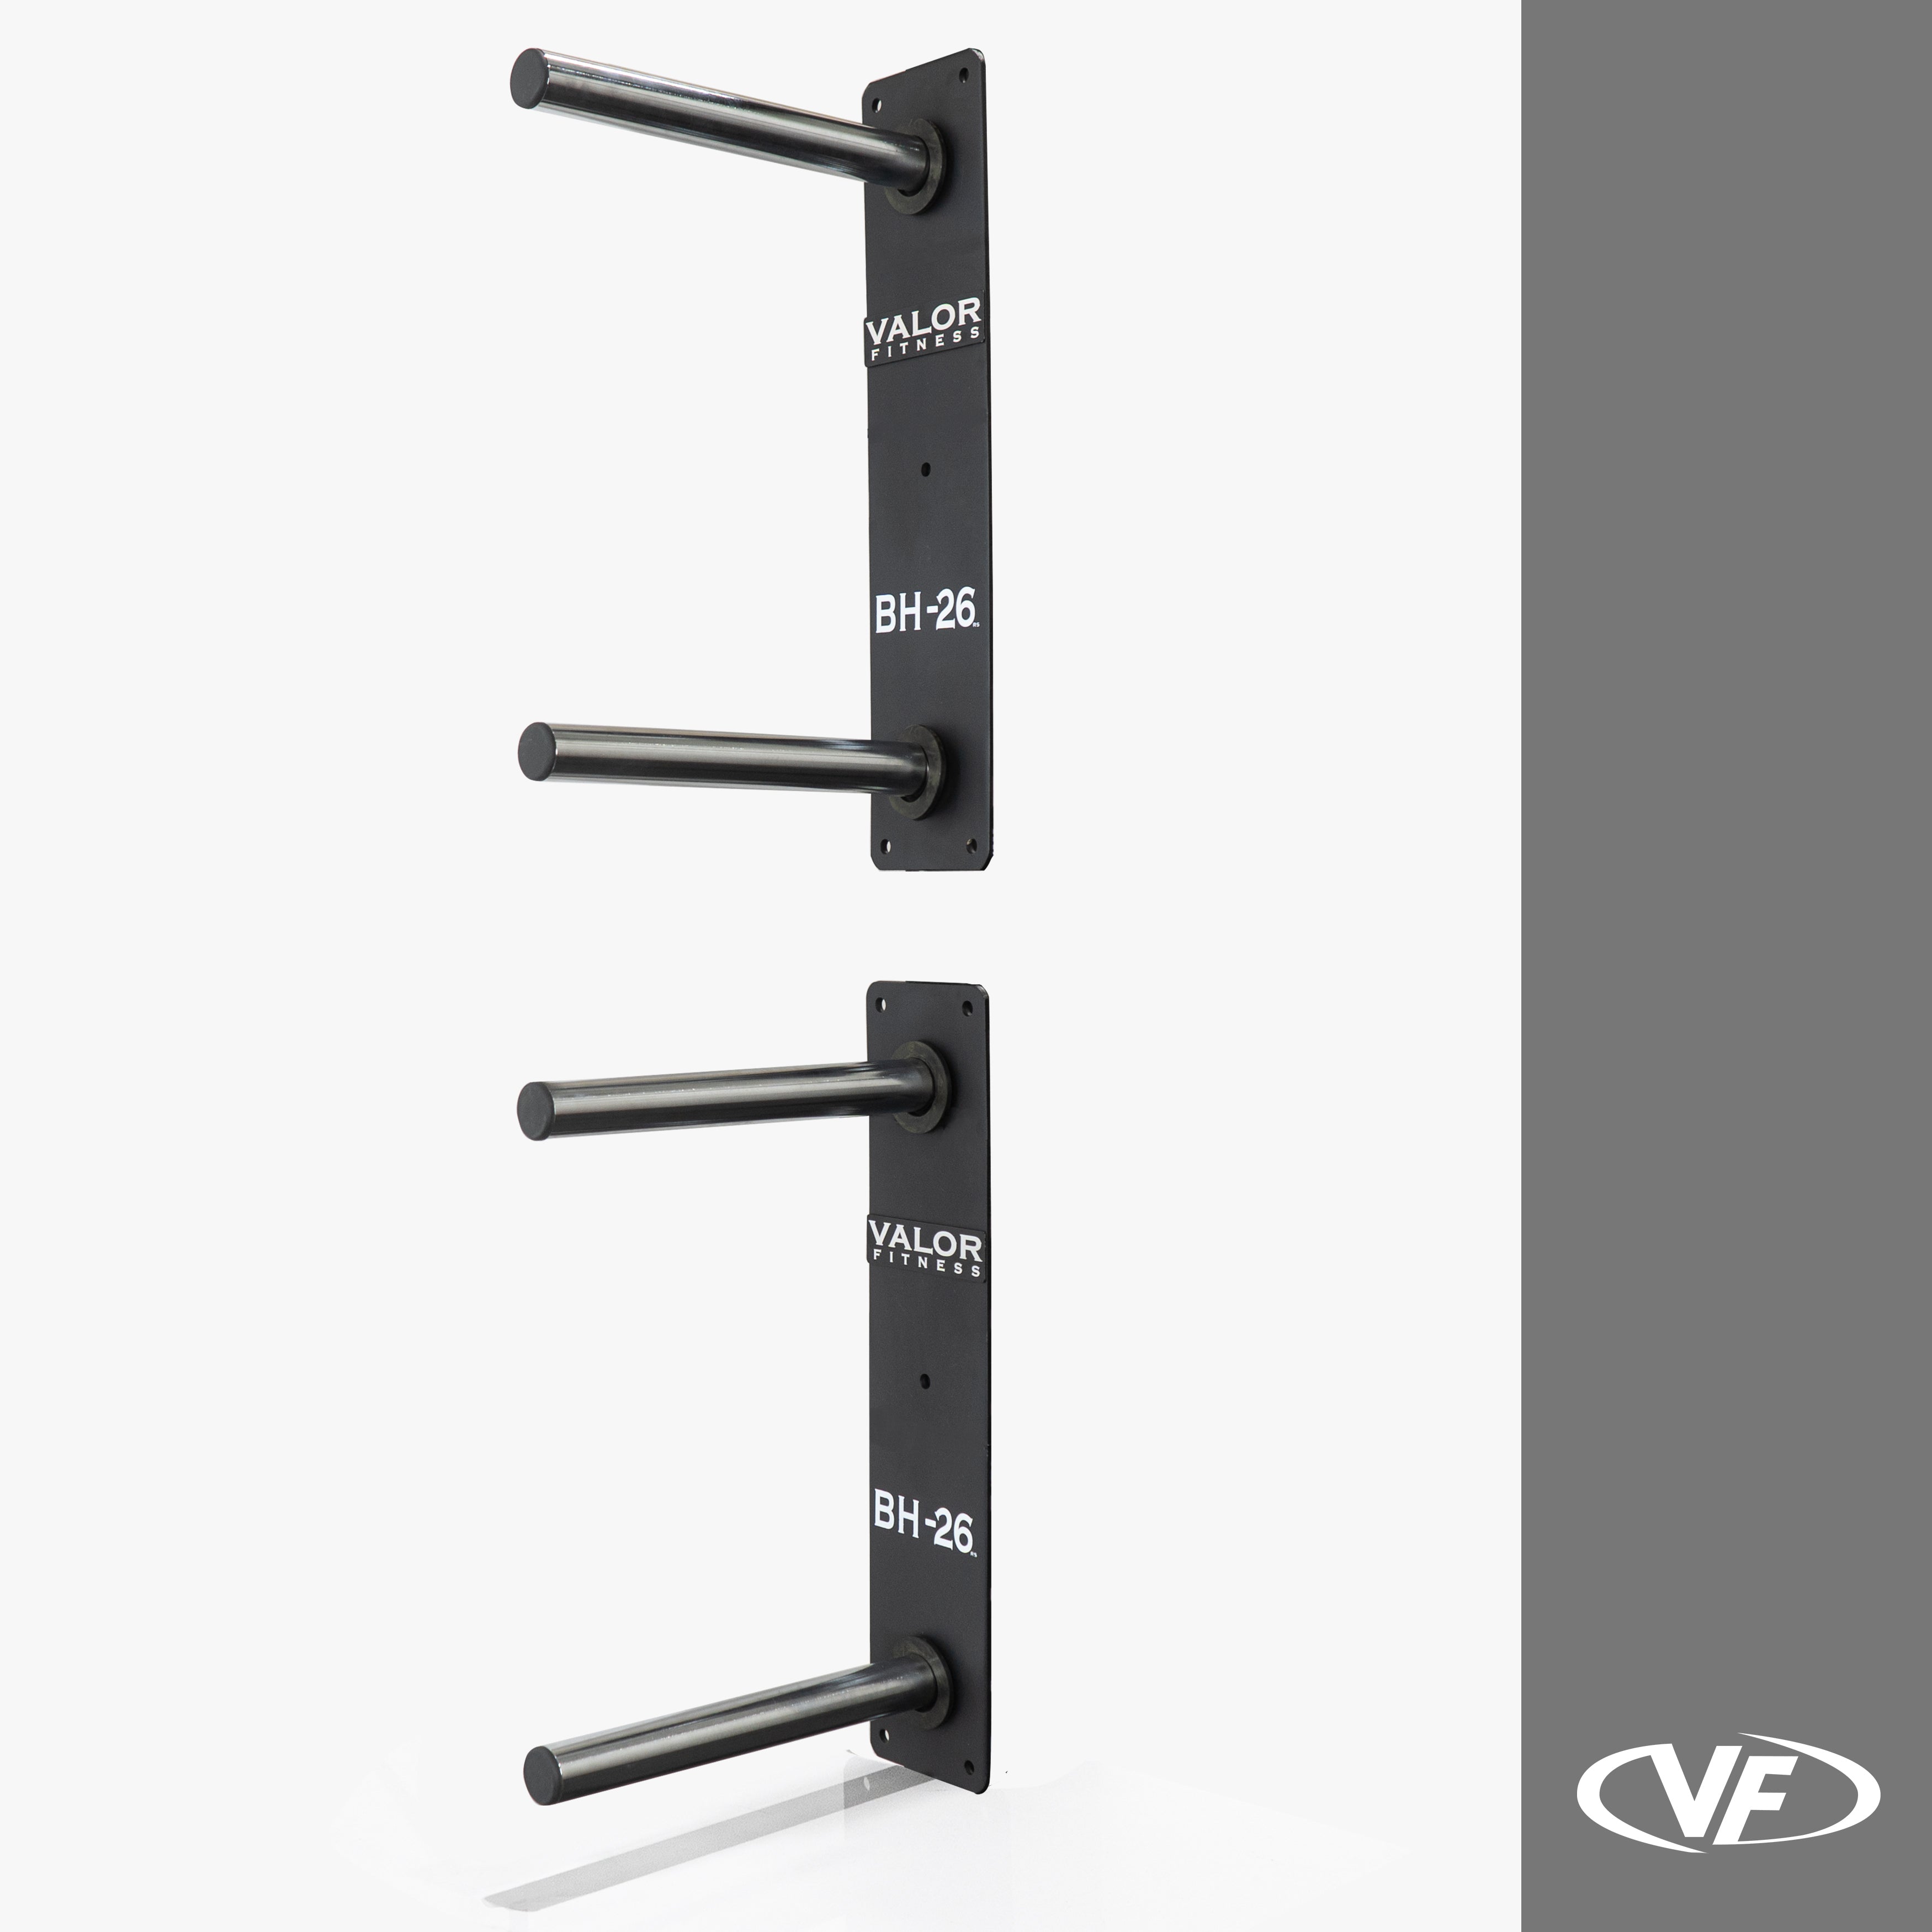 Weight Plate Wall Mounted Storage Rack - Angled 4-Peg Design - Olympic  Sized Weight Plate Organizer - Anchored Wall Mounted Storage